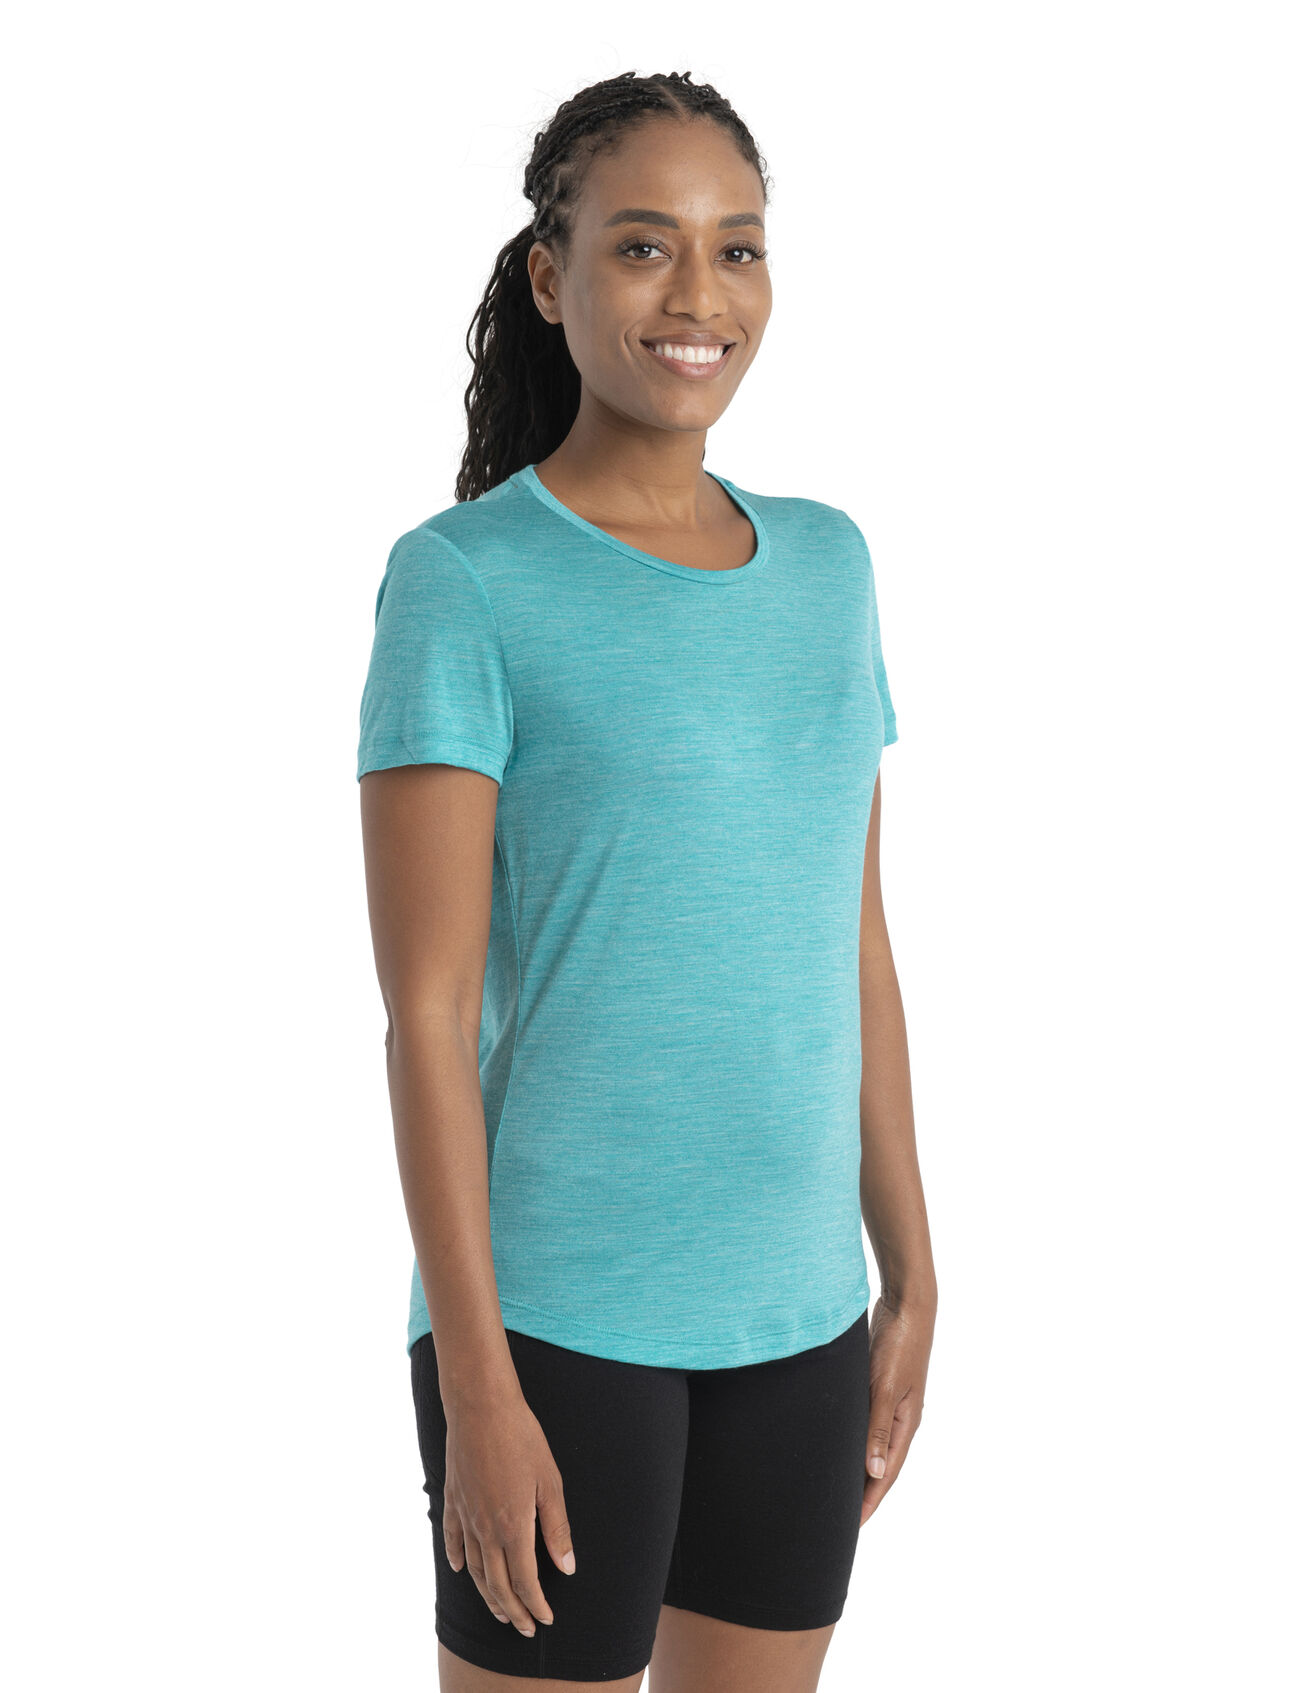 Womens Merino Sphere II Short Sleeve Tee A soft merino-blend tee made with our lightweight Cool-Lite™ jersey fabric, the Sphere II Short Sleeve Tee provides natural breathability, odor resistance and comfort.